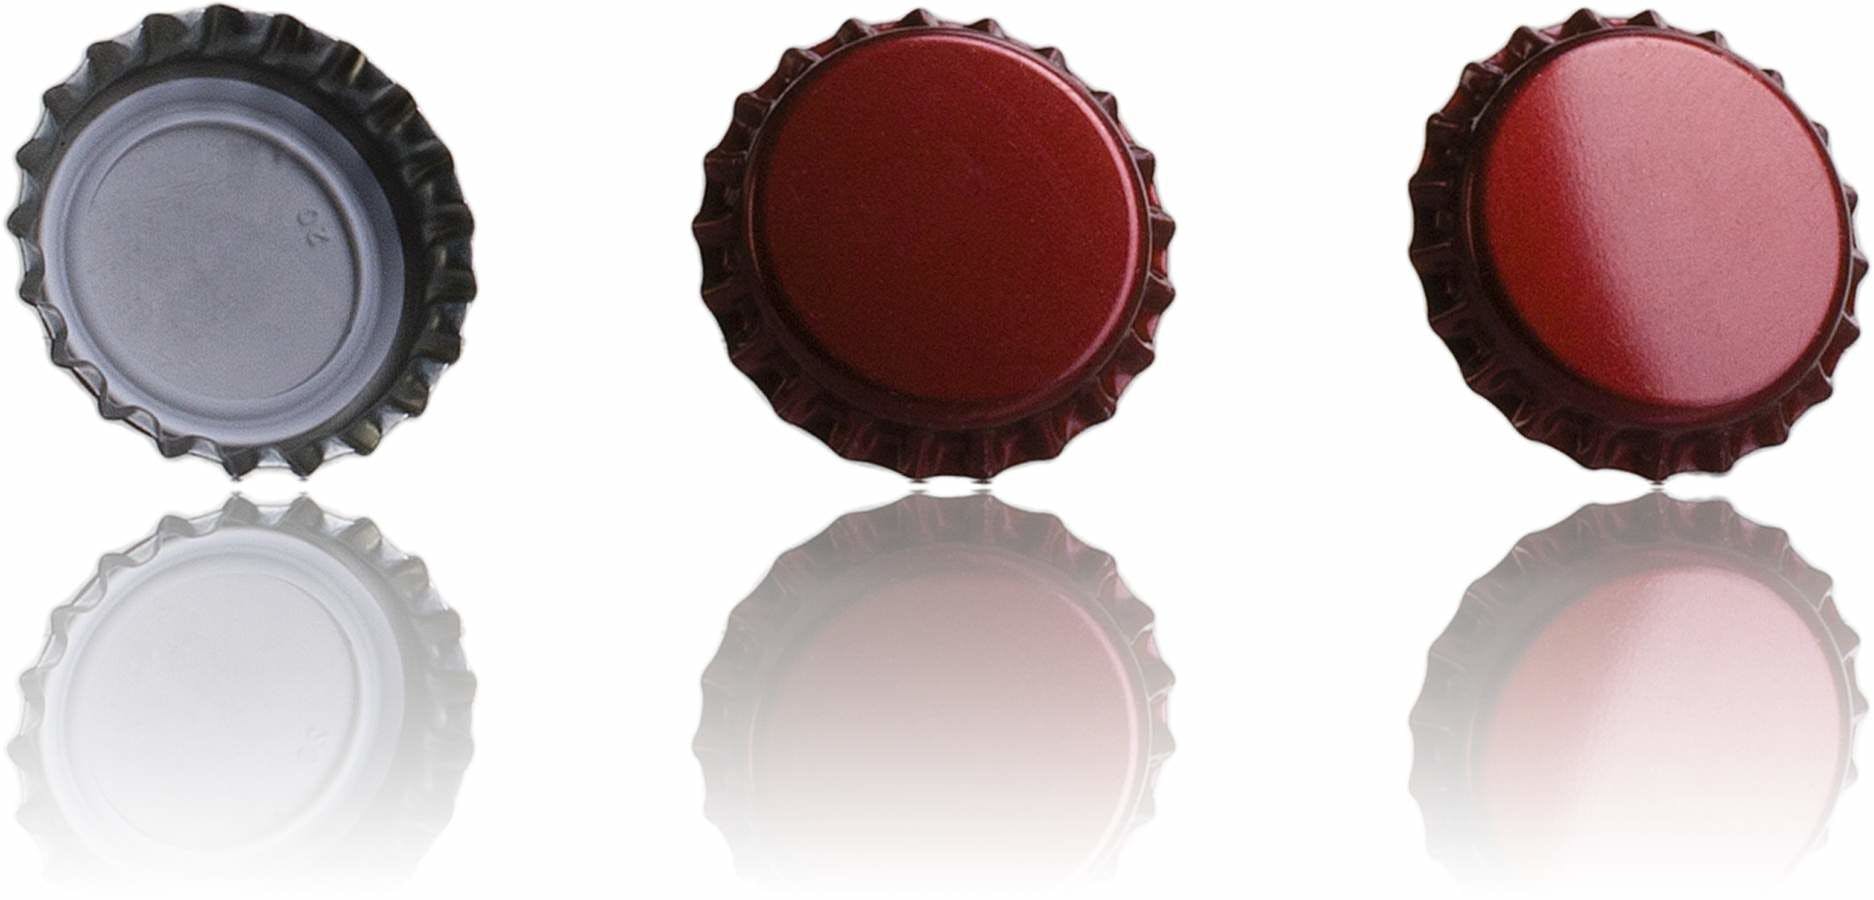 Crown 26 Stopper Red Ruby MetaIMGIn Tapones